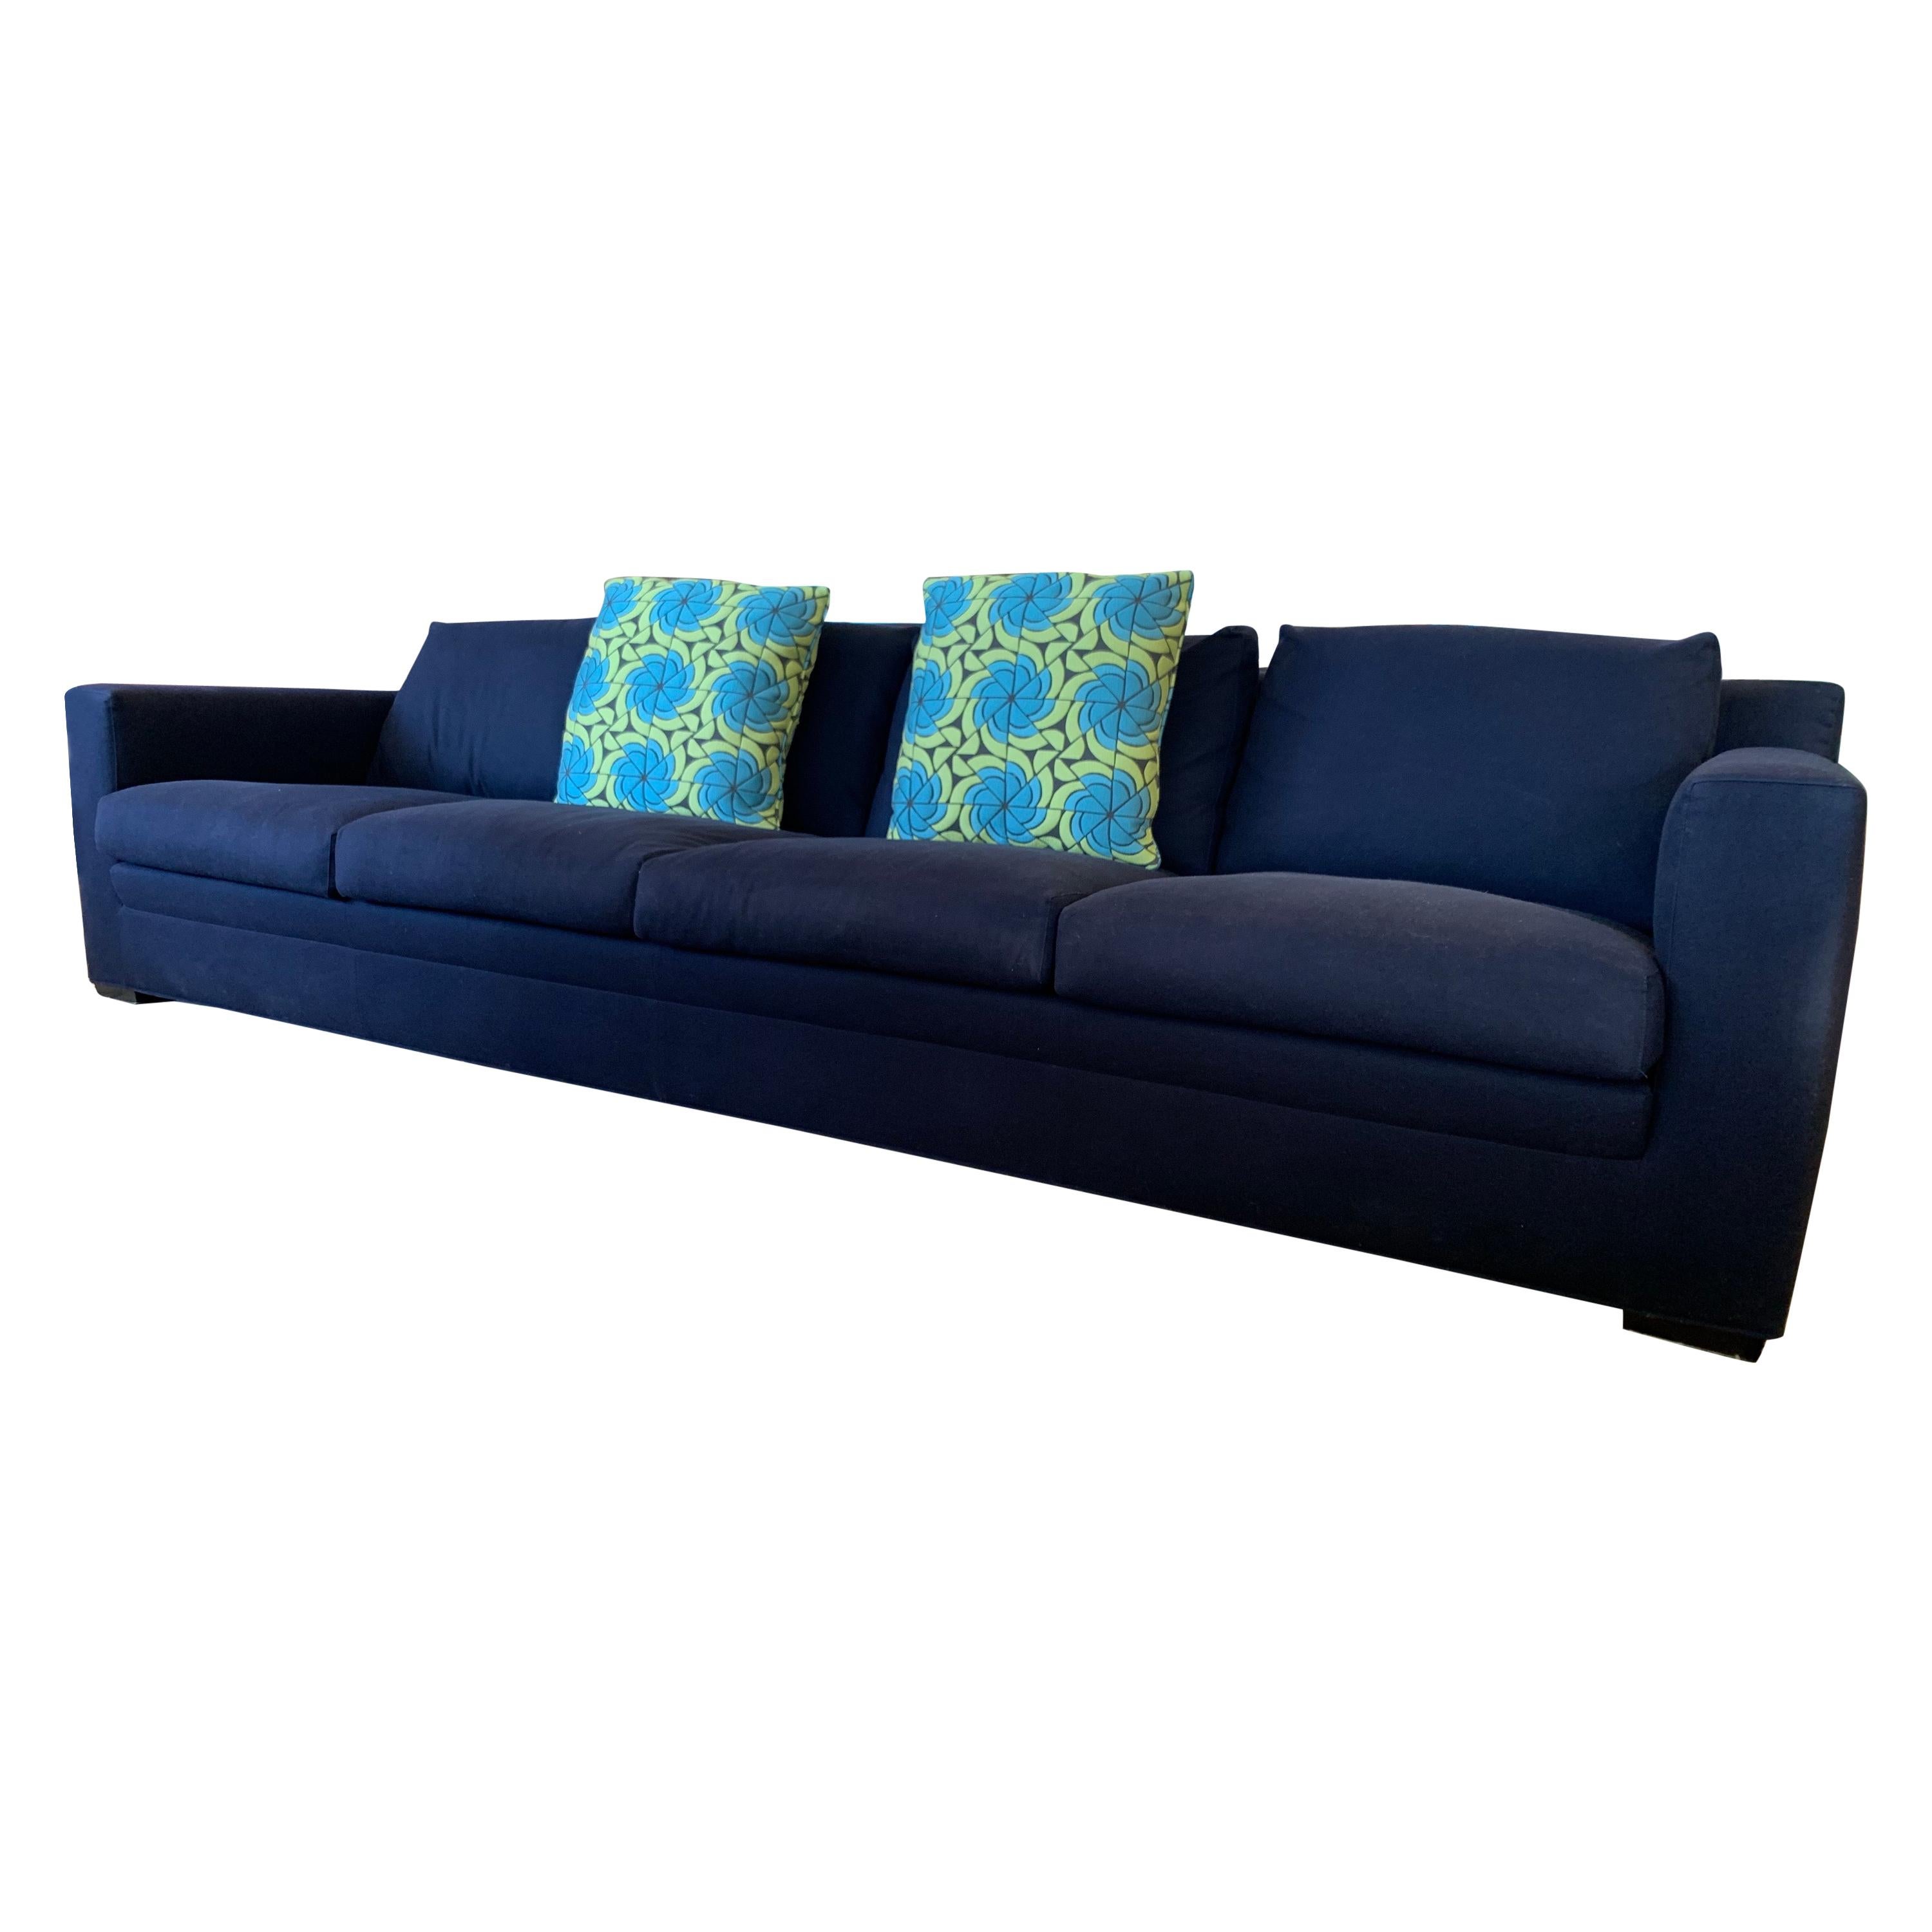 Minotti Navy Blue Extra Long Sofa Made in Italy with Knoll Key West Pillows